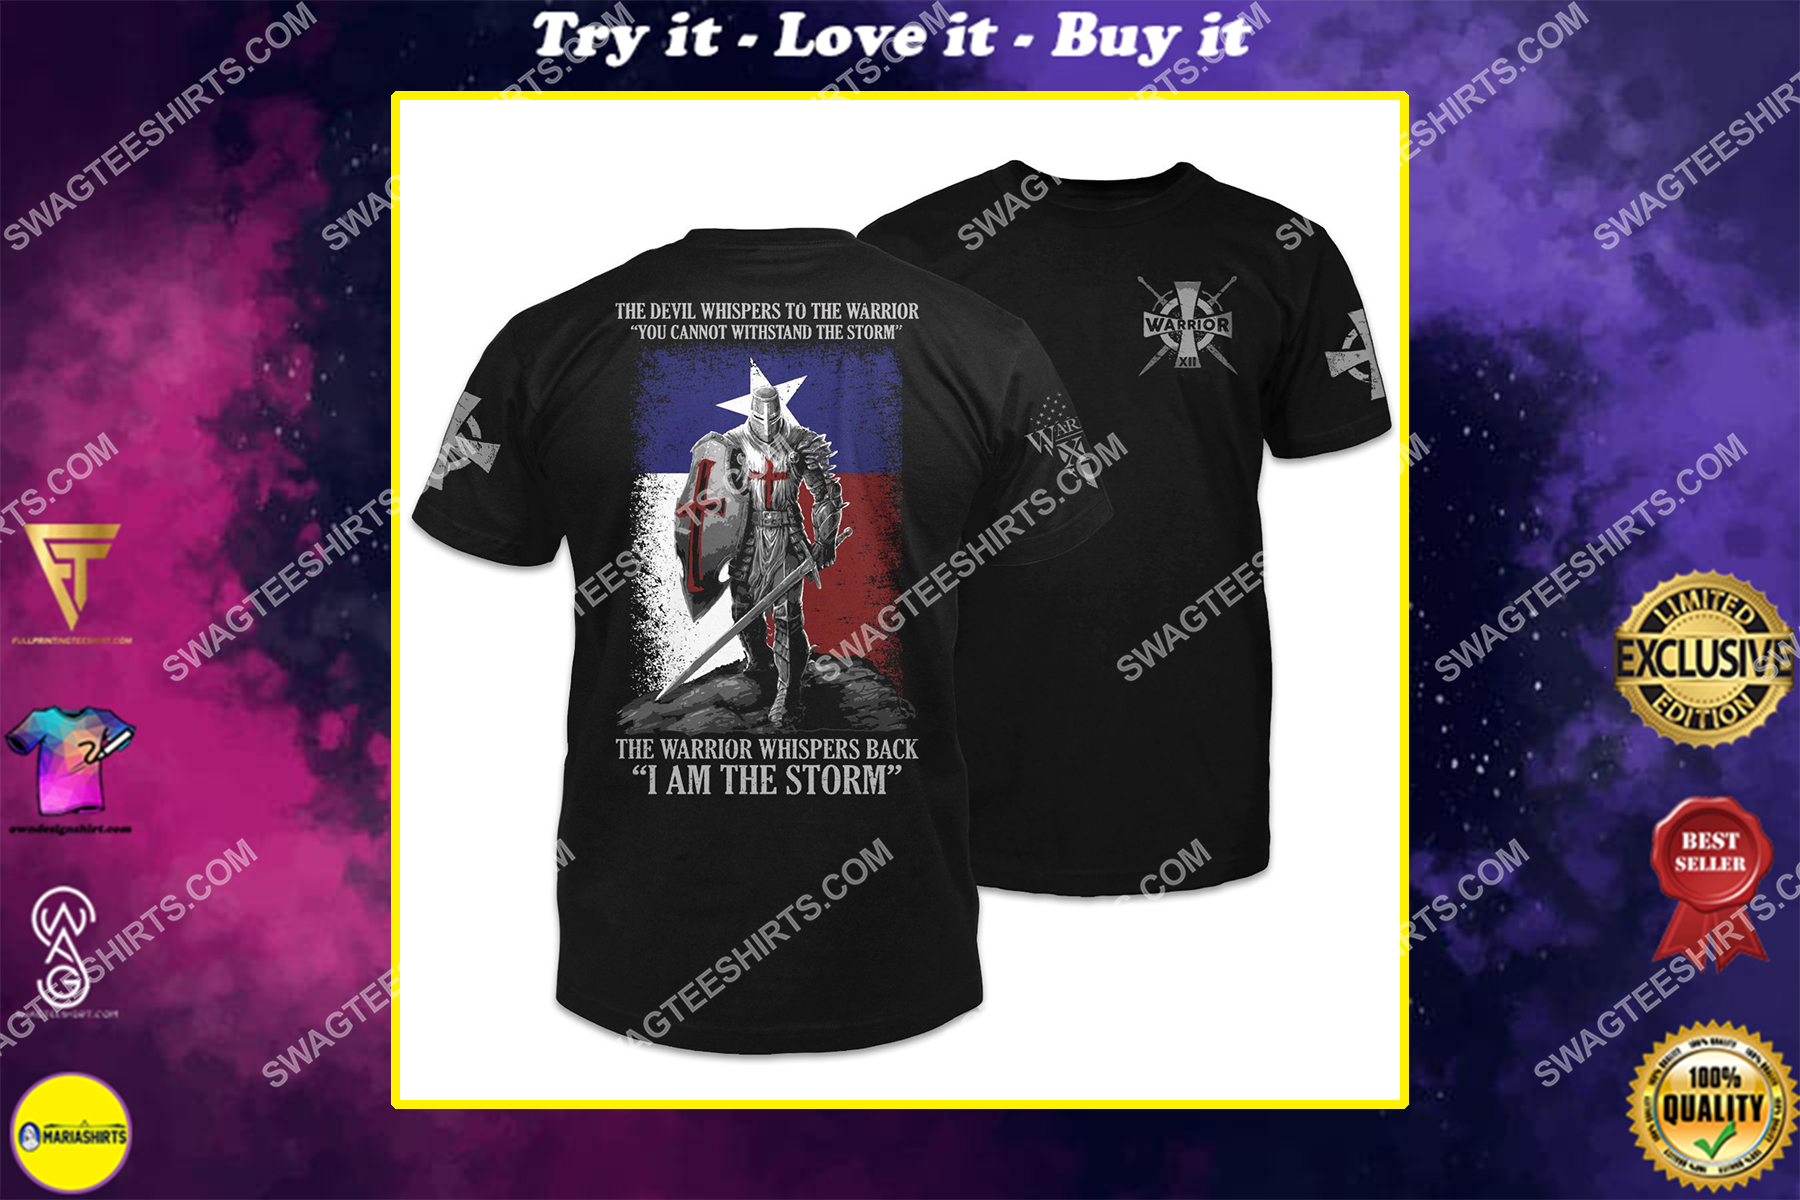 the devil whispers to the warrior you cannot withstand the storm knights templar shirt